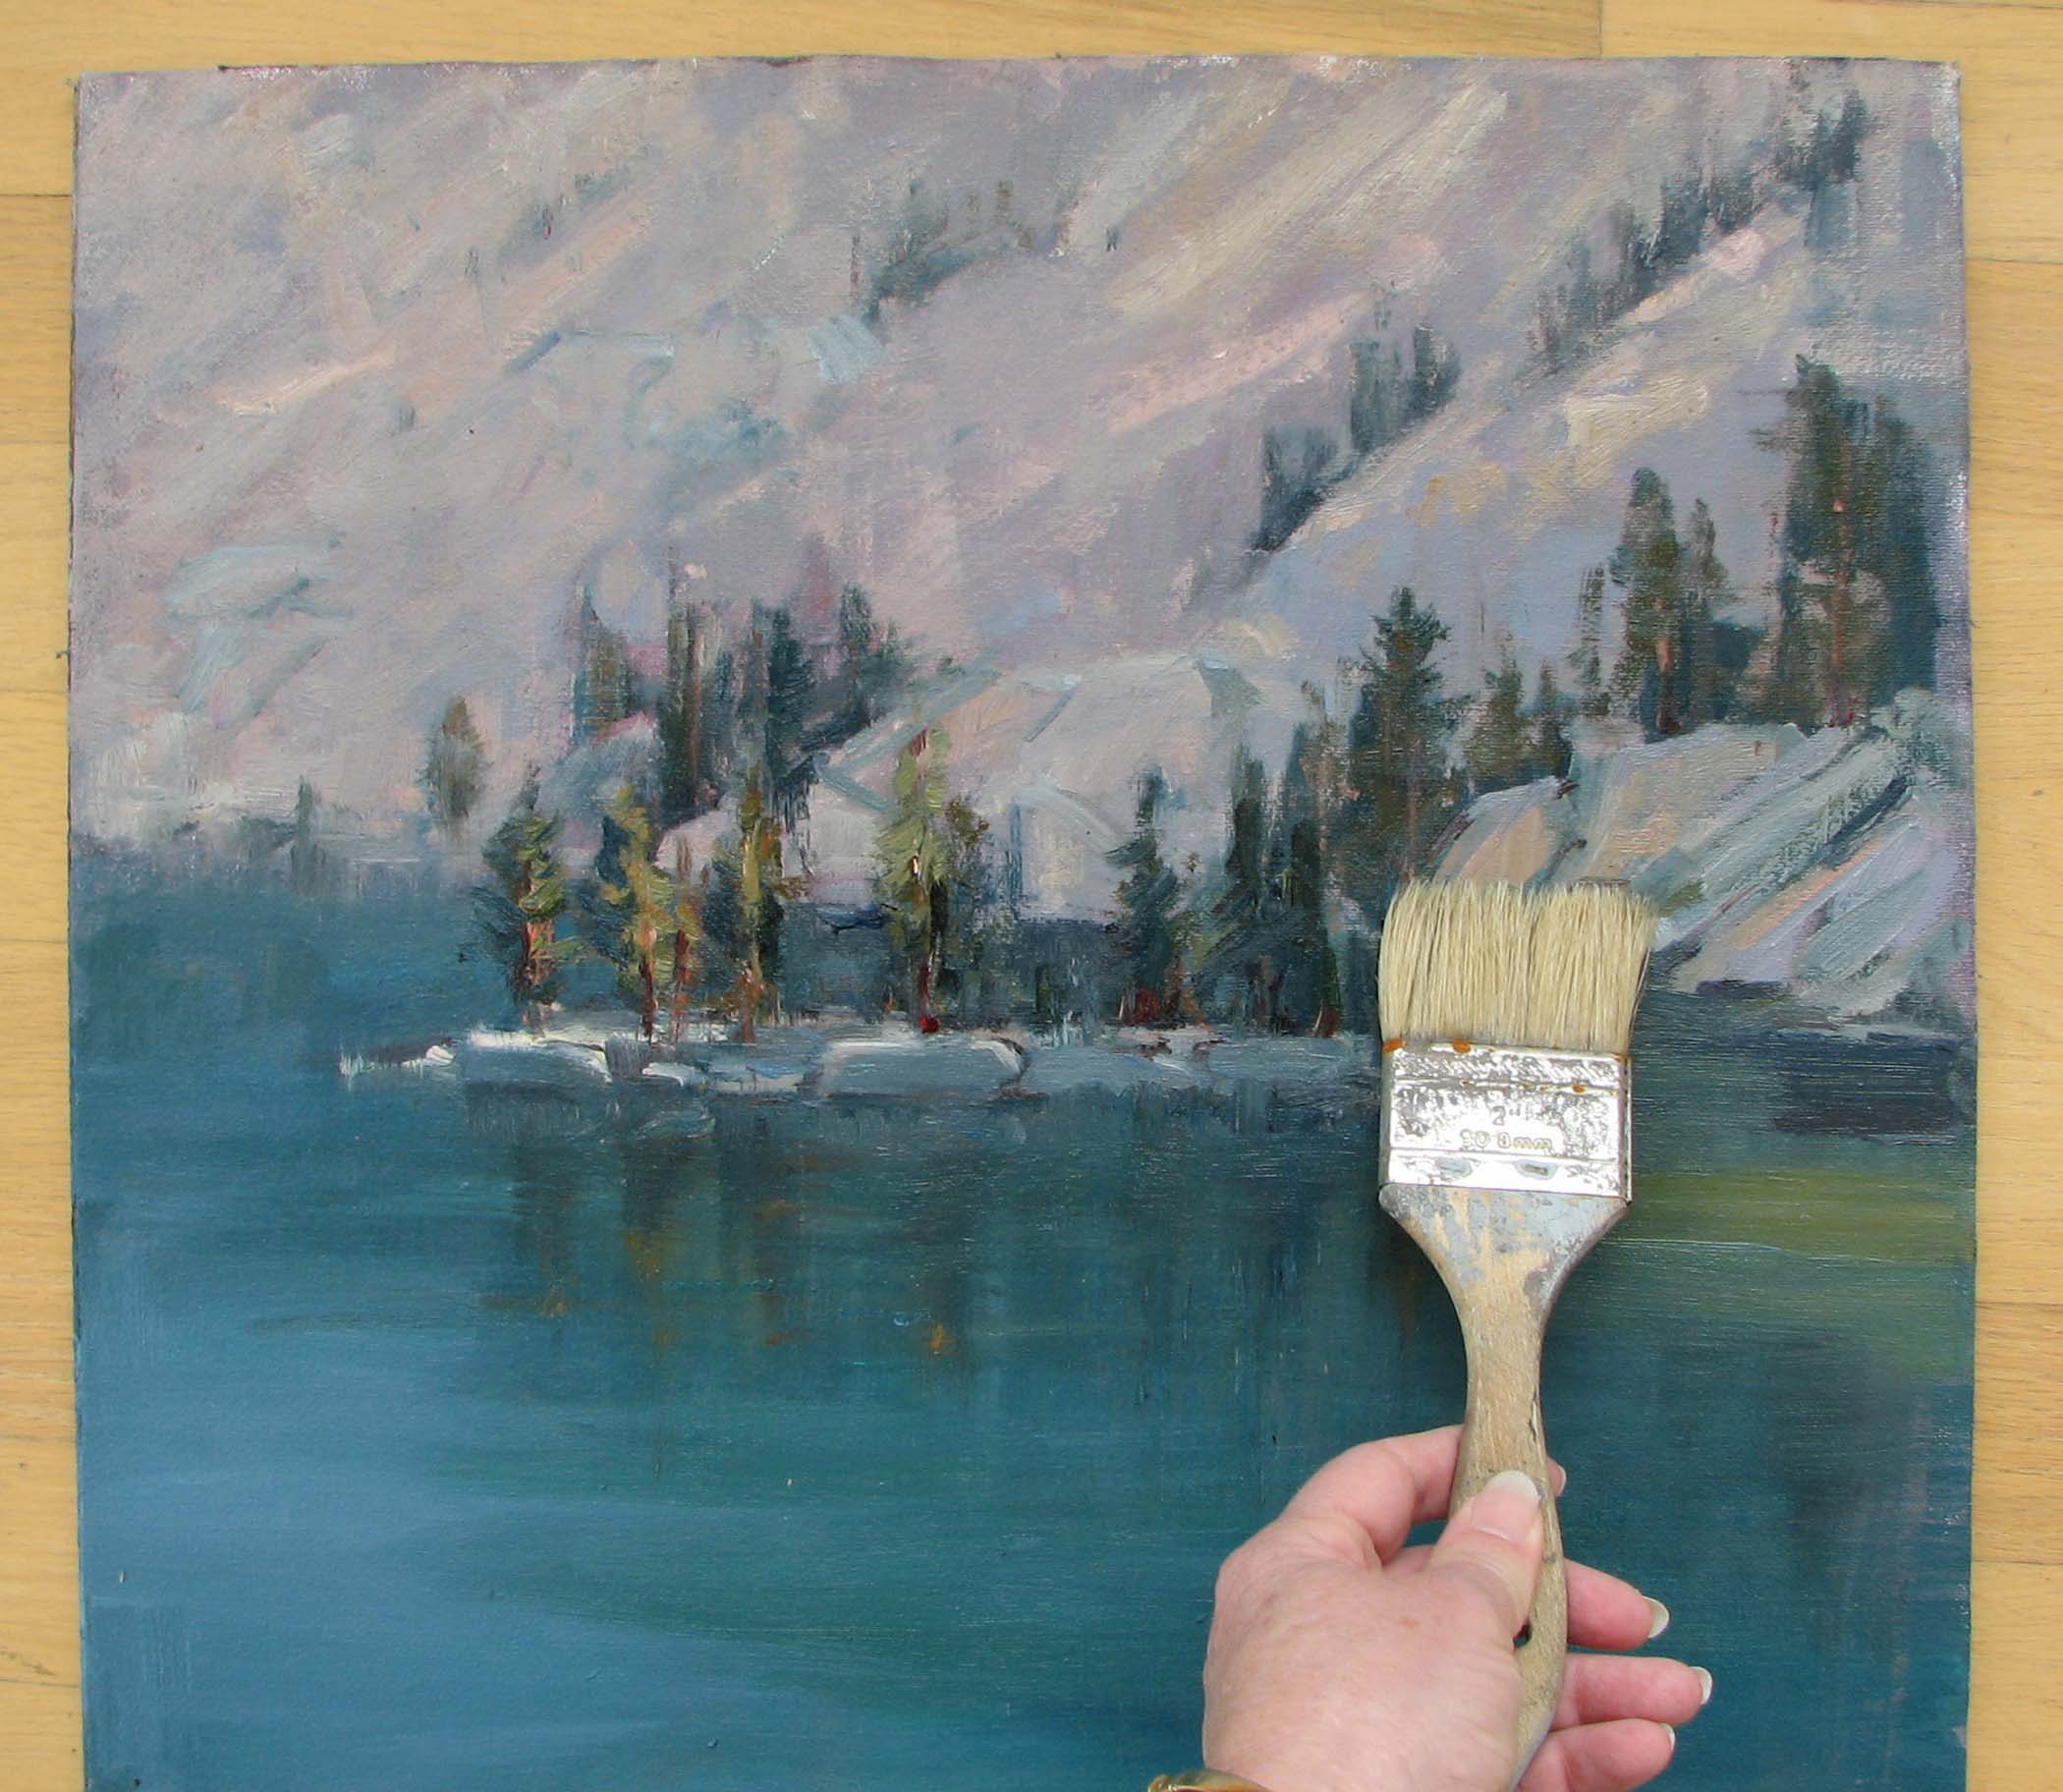 How to Varnish an Acrylic or Oil Painting